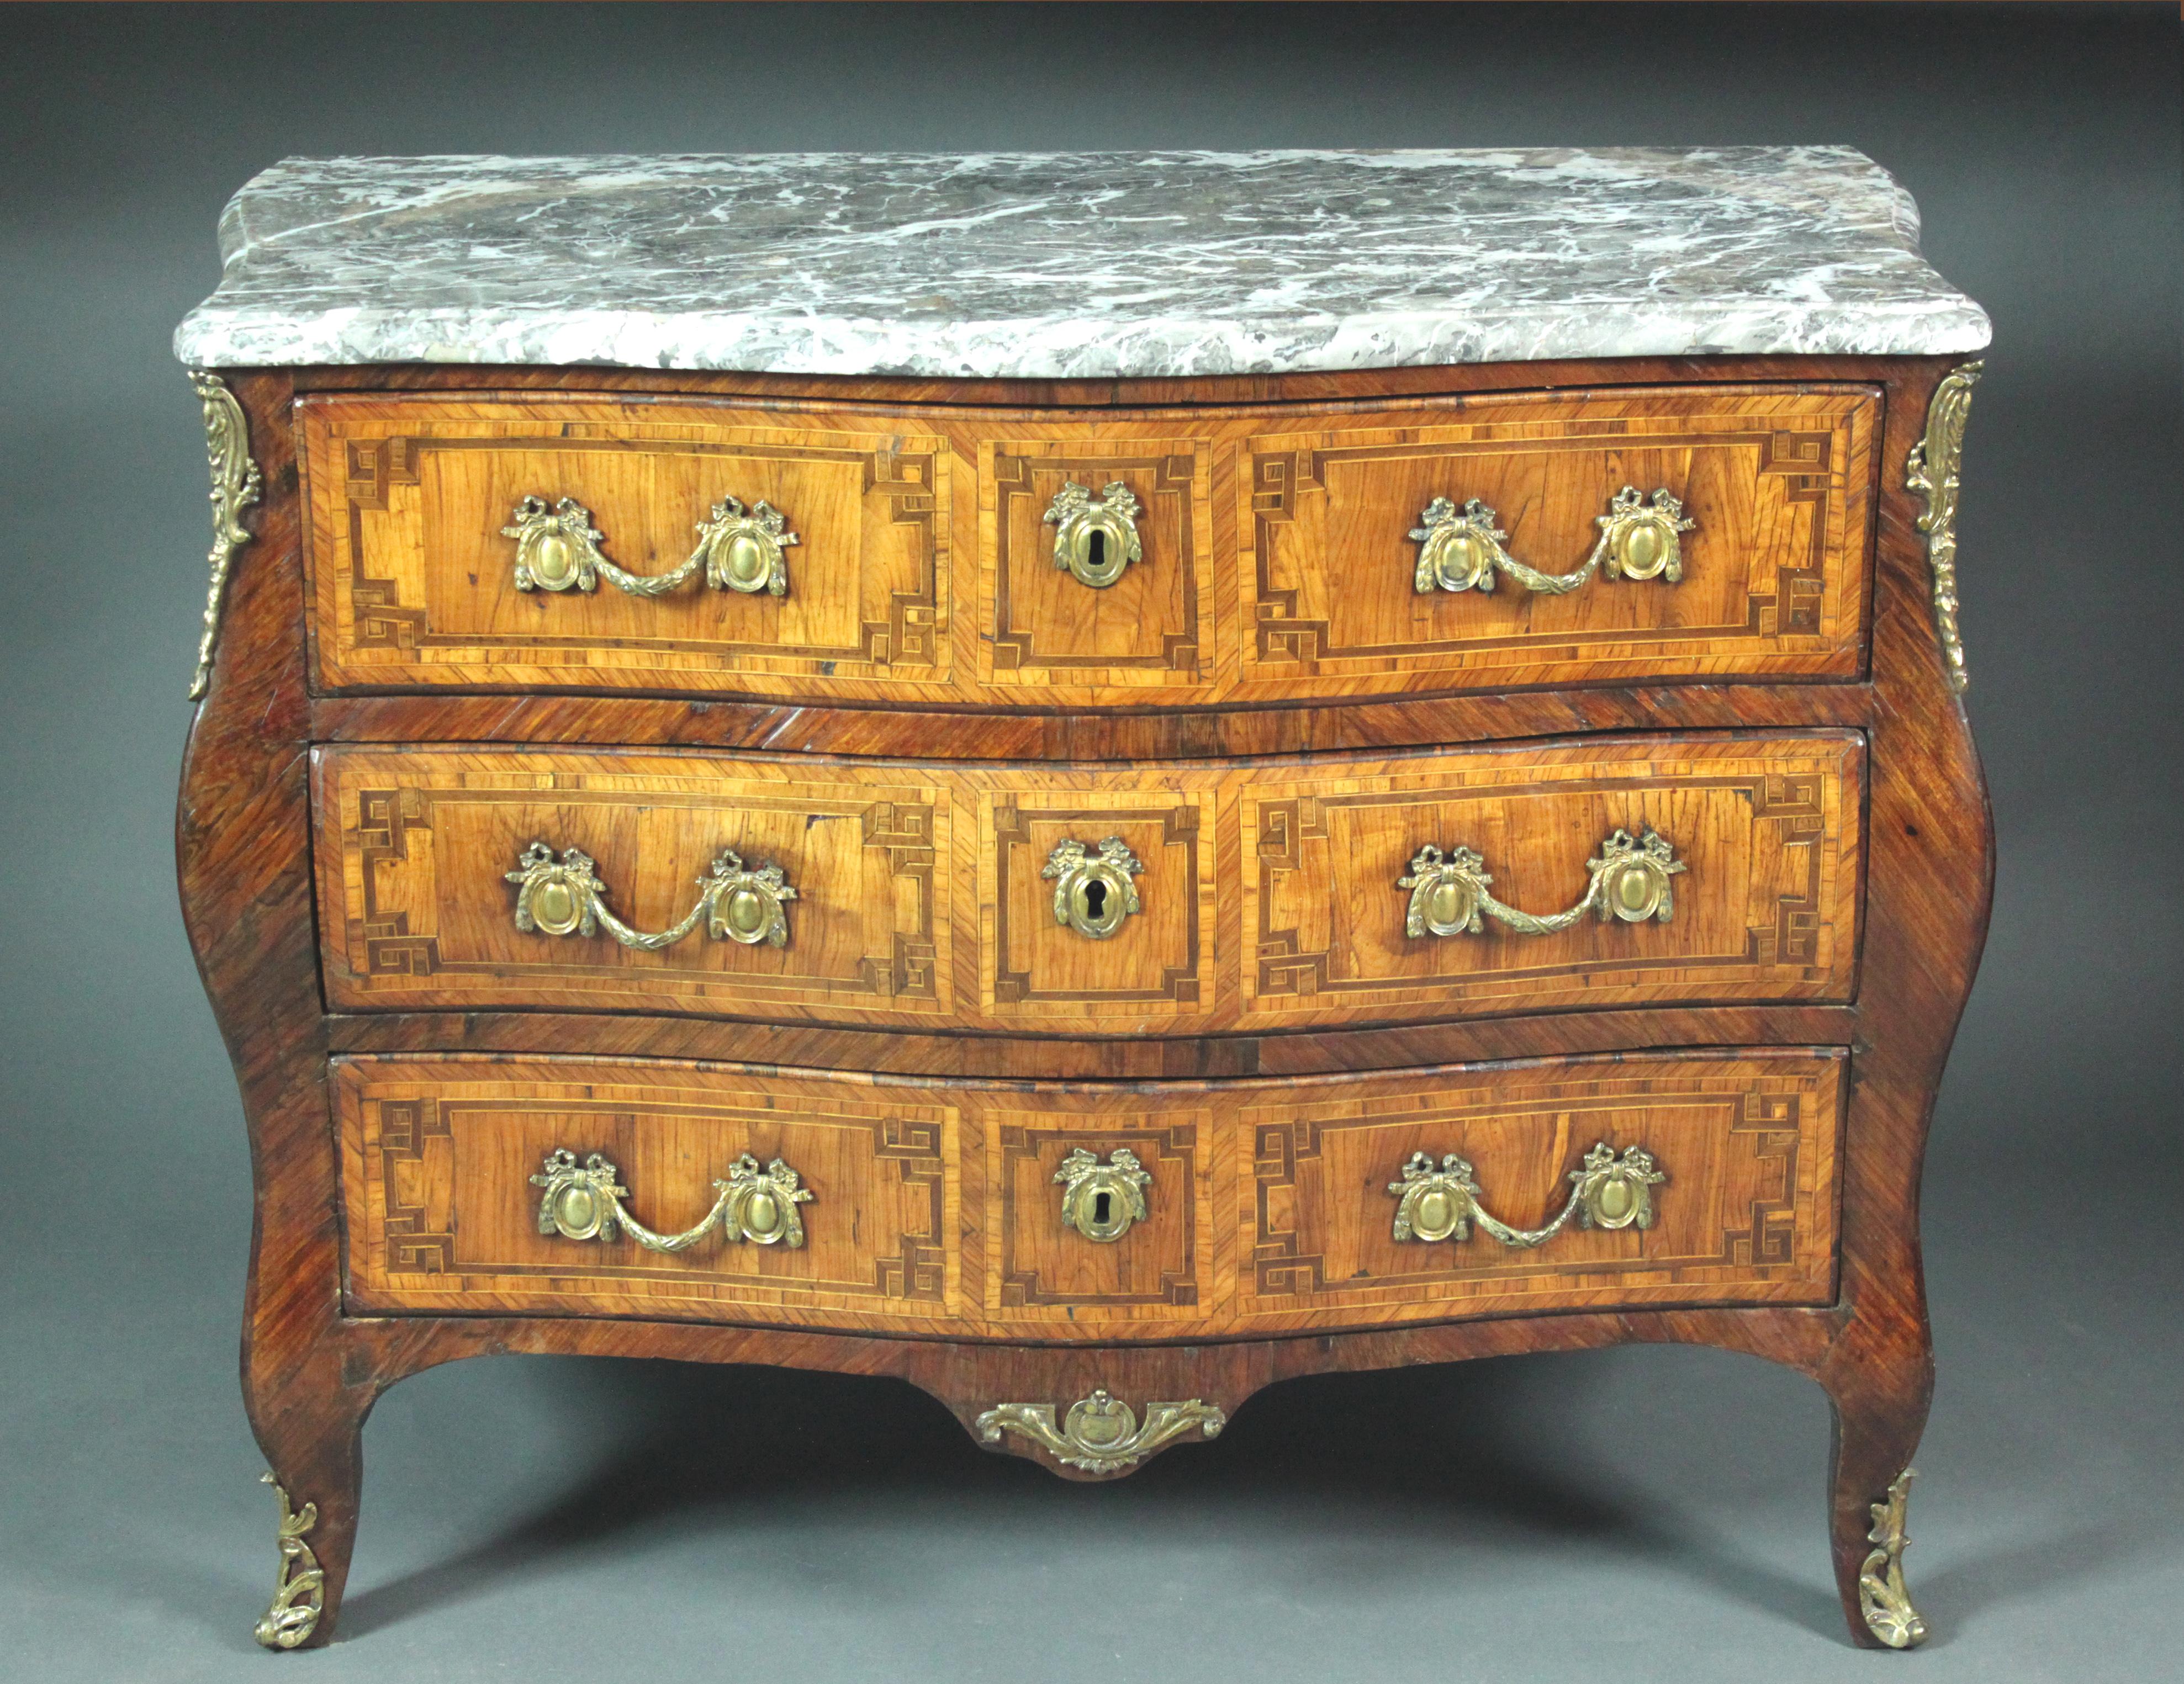 A Louis XV kingwood commode of a good color and patina: attractive serpentine and bombe shape, original mounts still retaining most of their gilding, original Saint-Anne Grand Dessin grey marble top, corner re-stuck but hardly visible.
Very fine